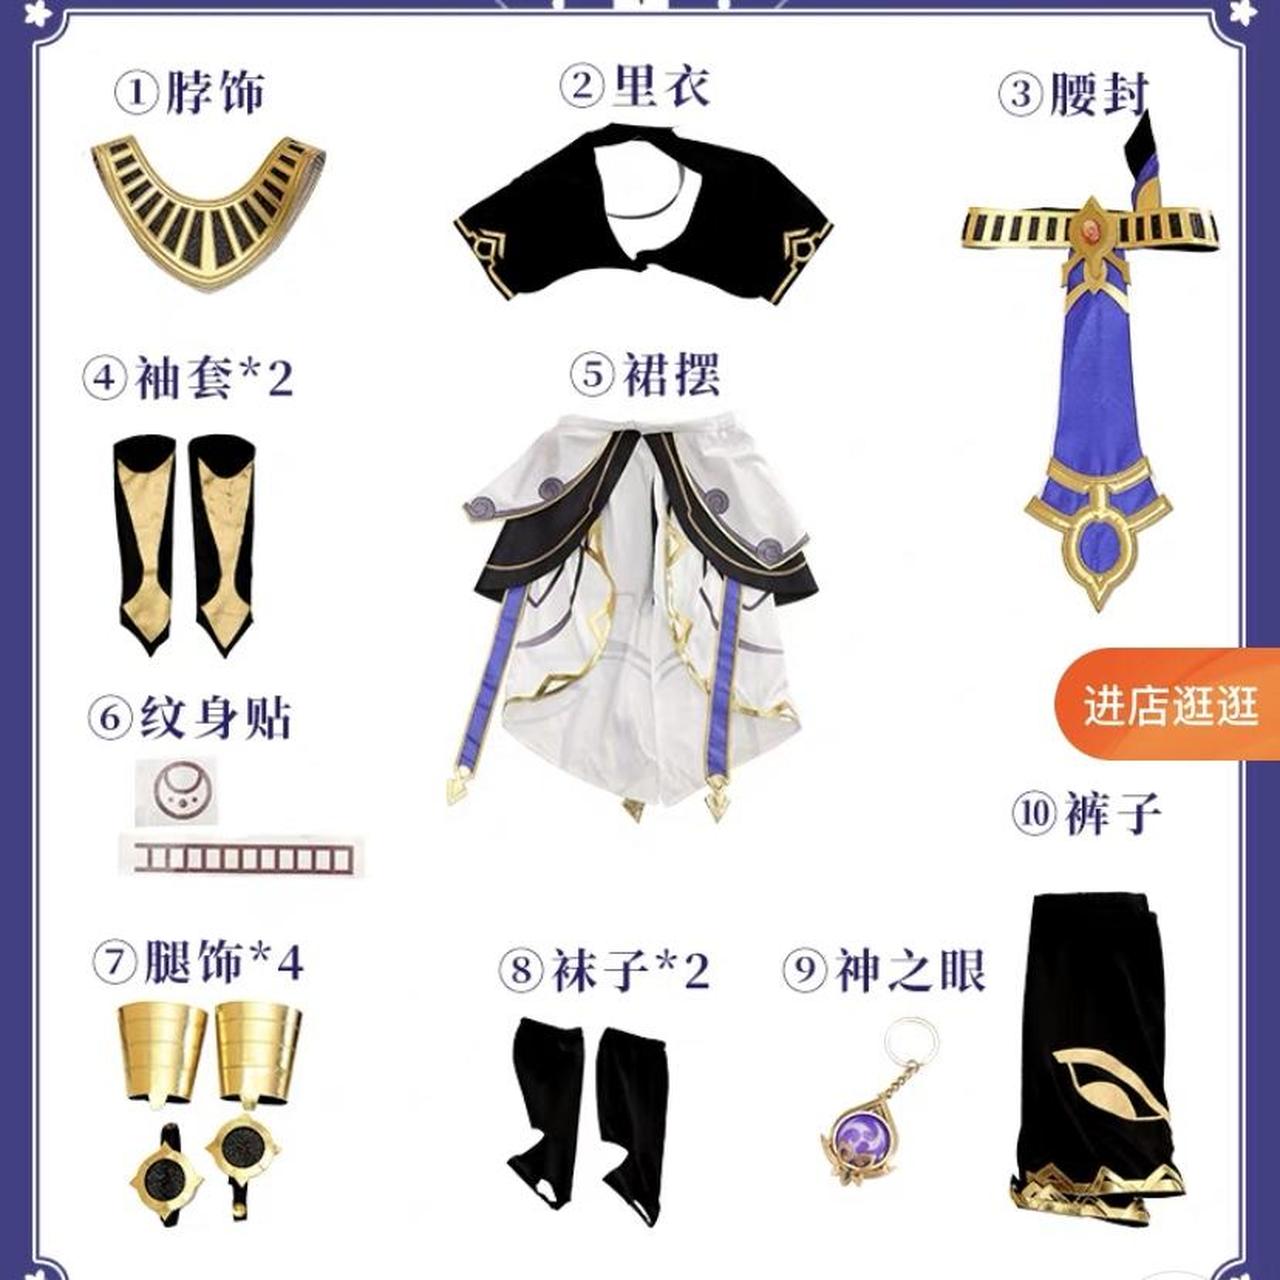 Genshin Impact Cyno cosplay purchased from Taobao.... - Depop